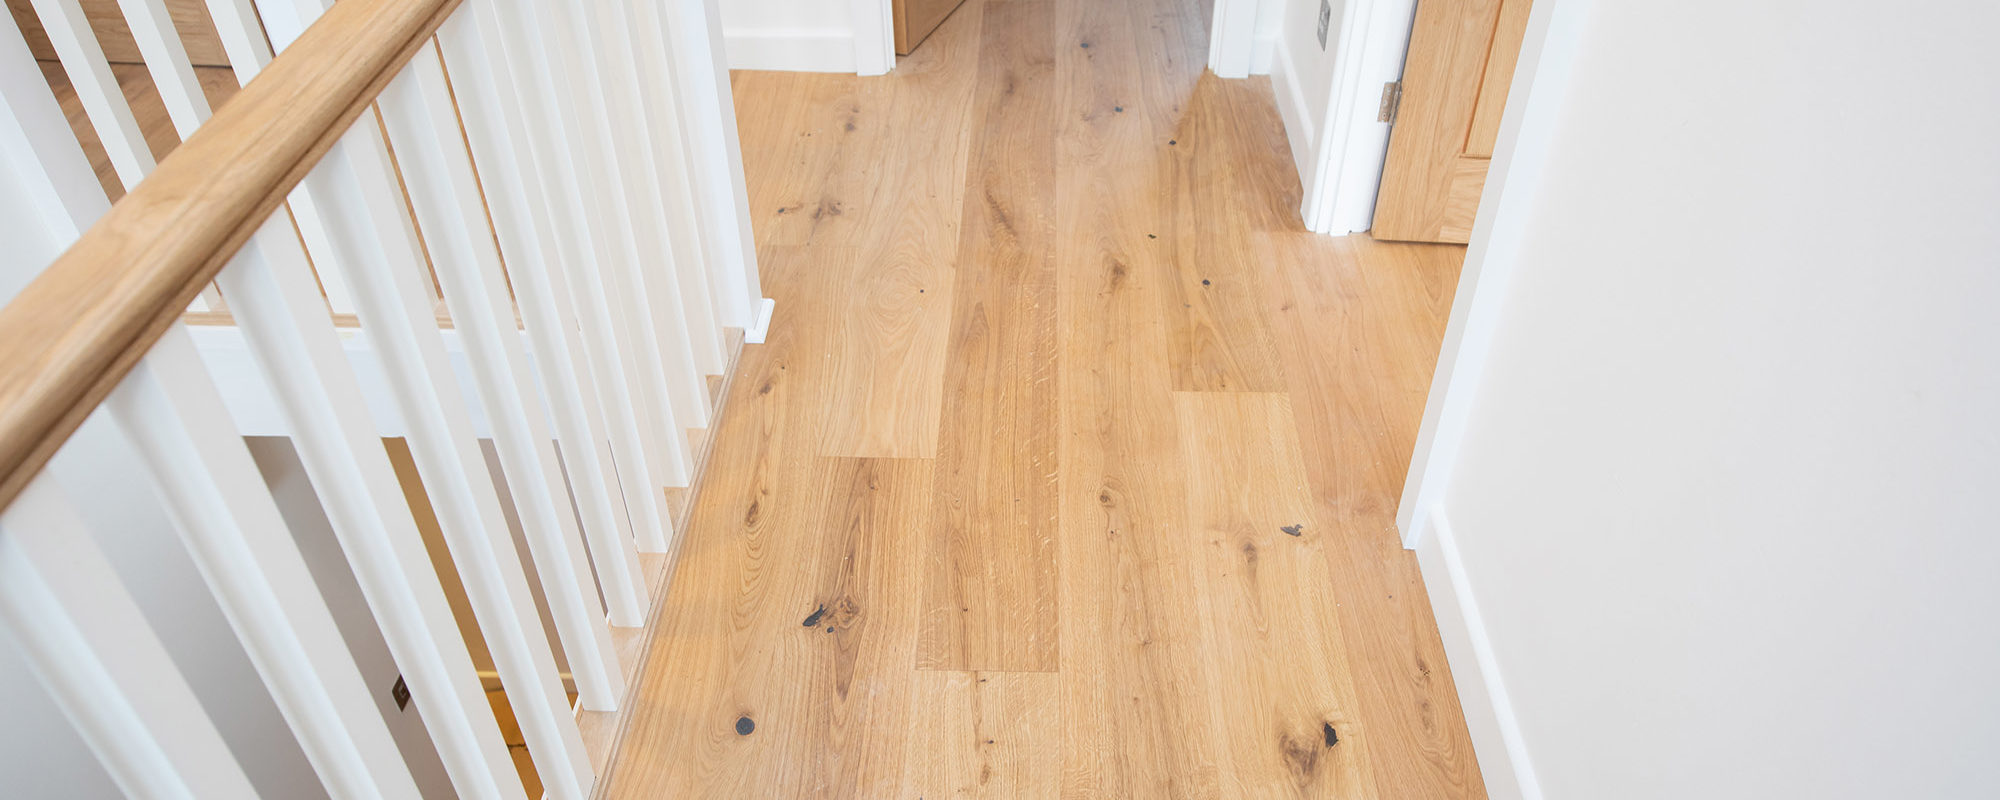 The new oak floor is warm and inviting